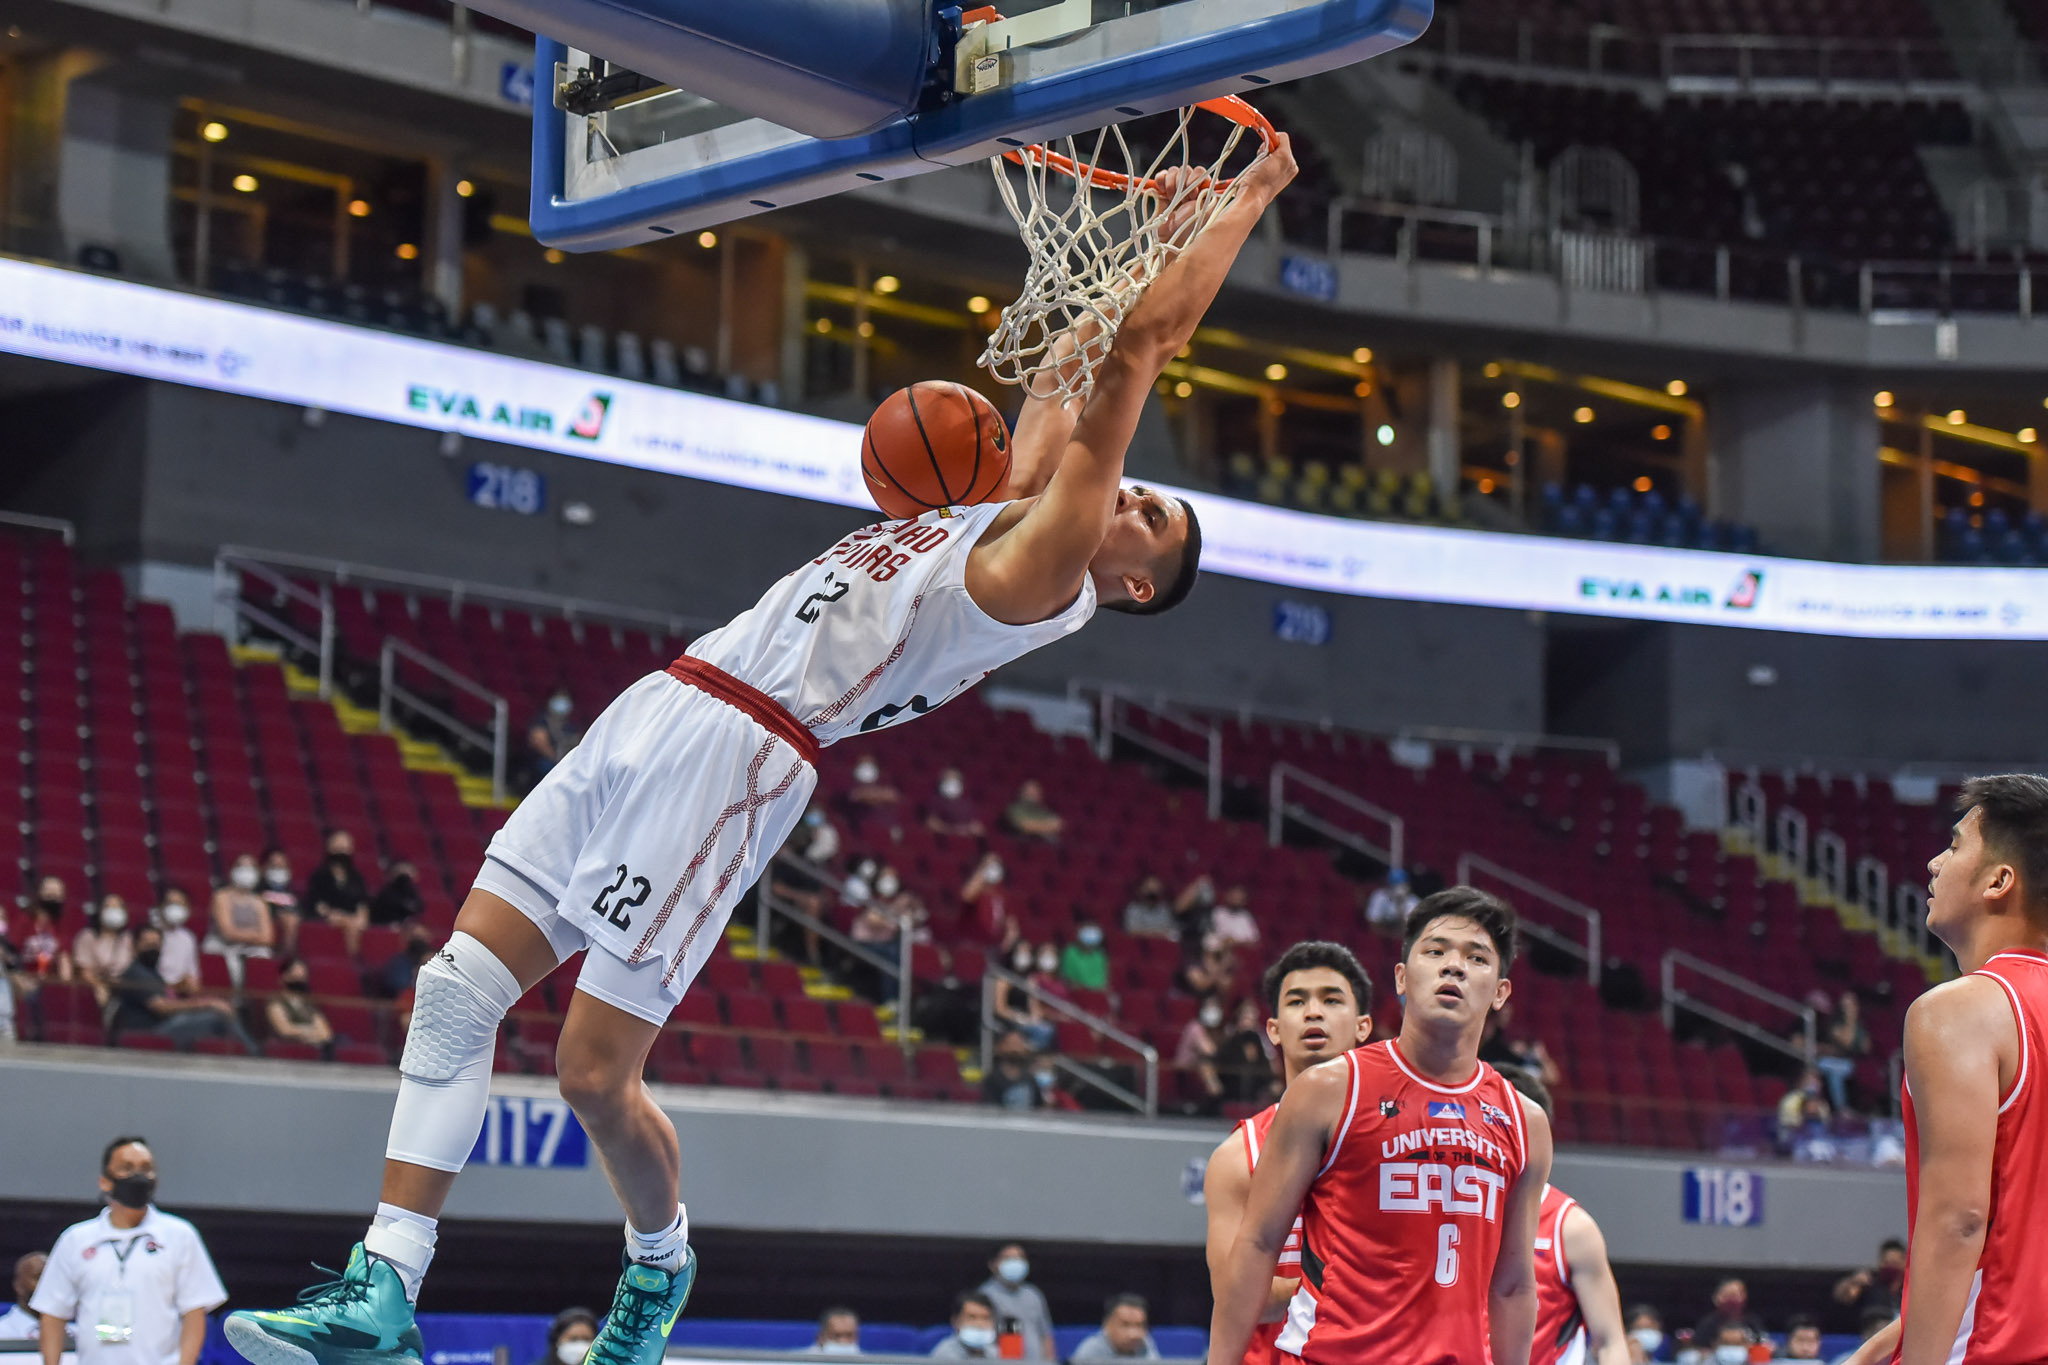 UP's Zavier Lucero soars for a dunk. UAAP PHOTO